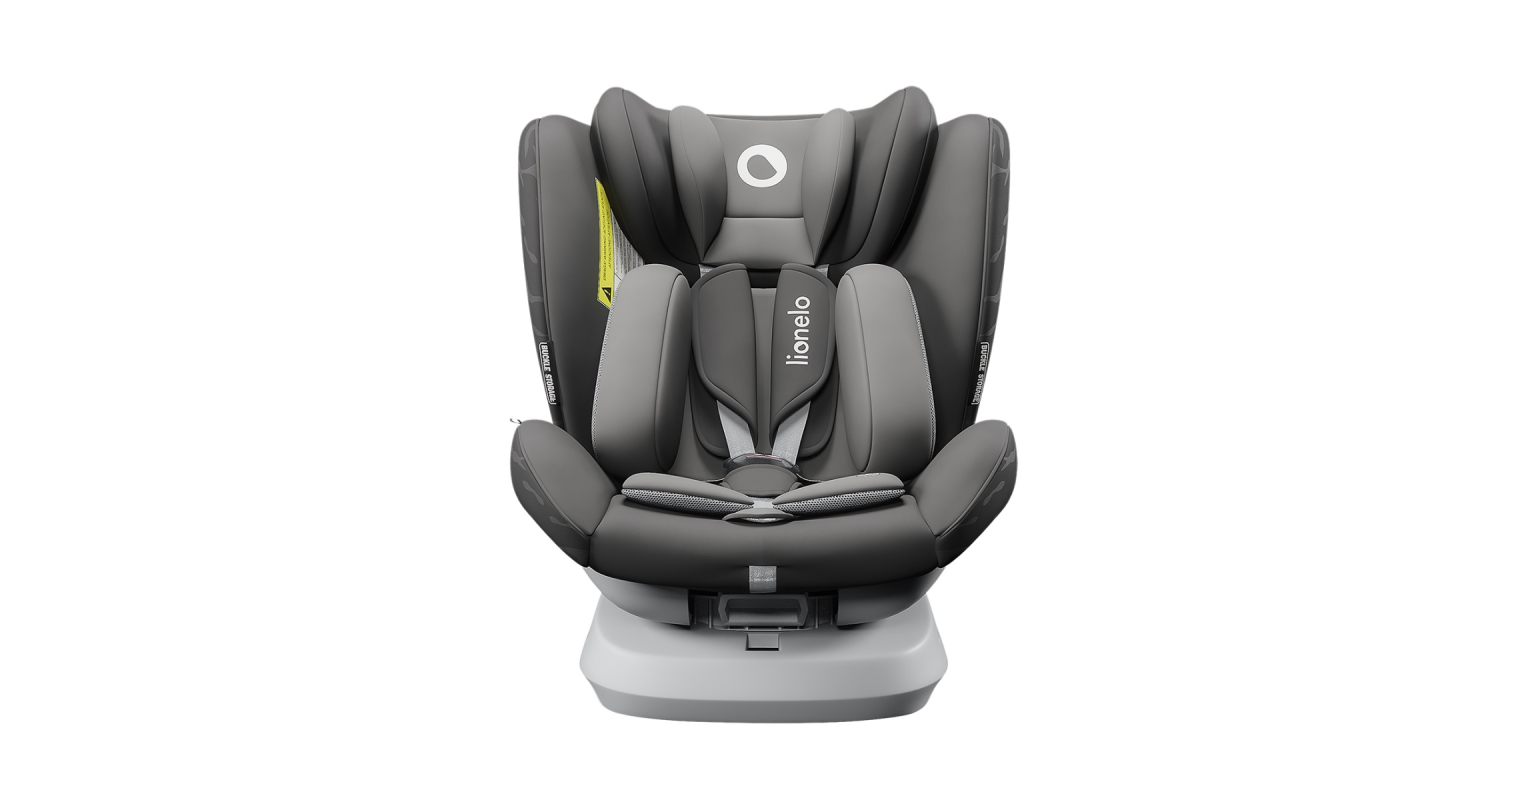 BASTIAAN car Chair of Lionelo. Groups I,II,III-weight from 9 to